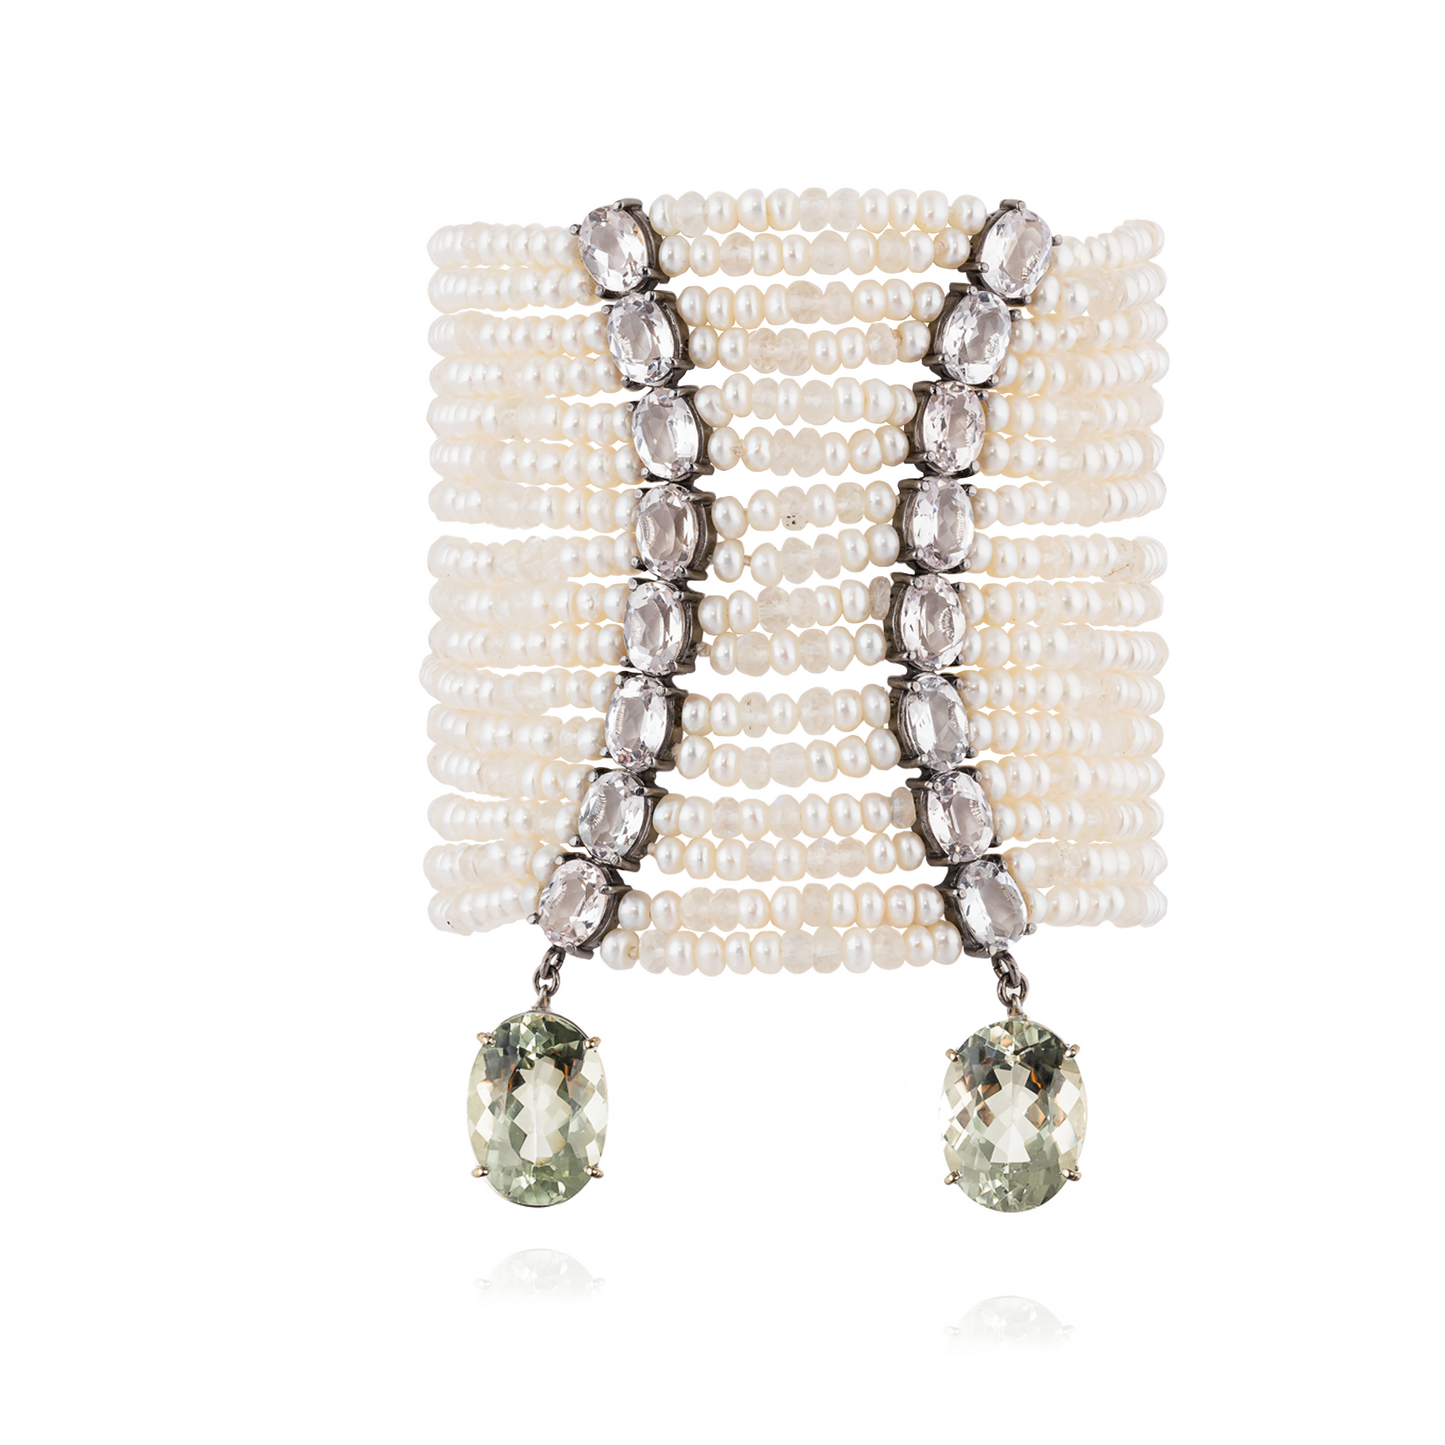 Load image into Gallery viewer, 18k White Gold Bracelet with Pearls, Moonstones, Topaz and  Diamonds
